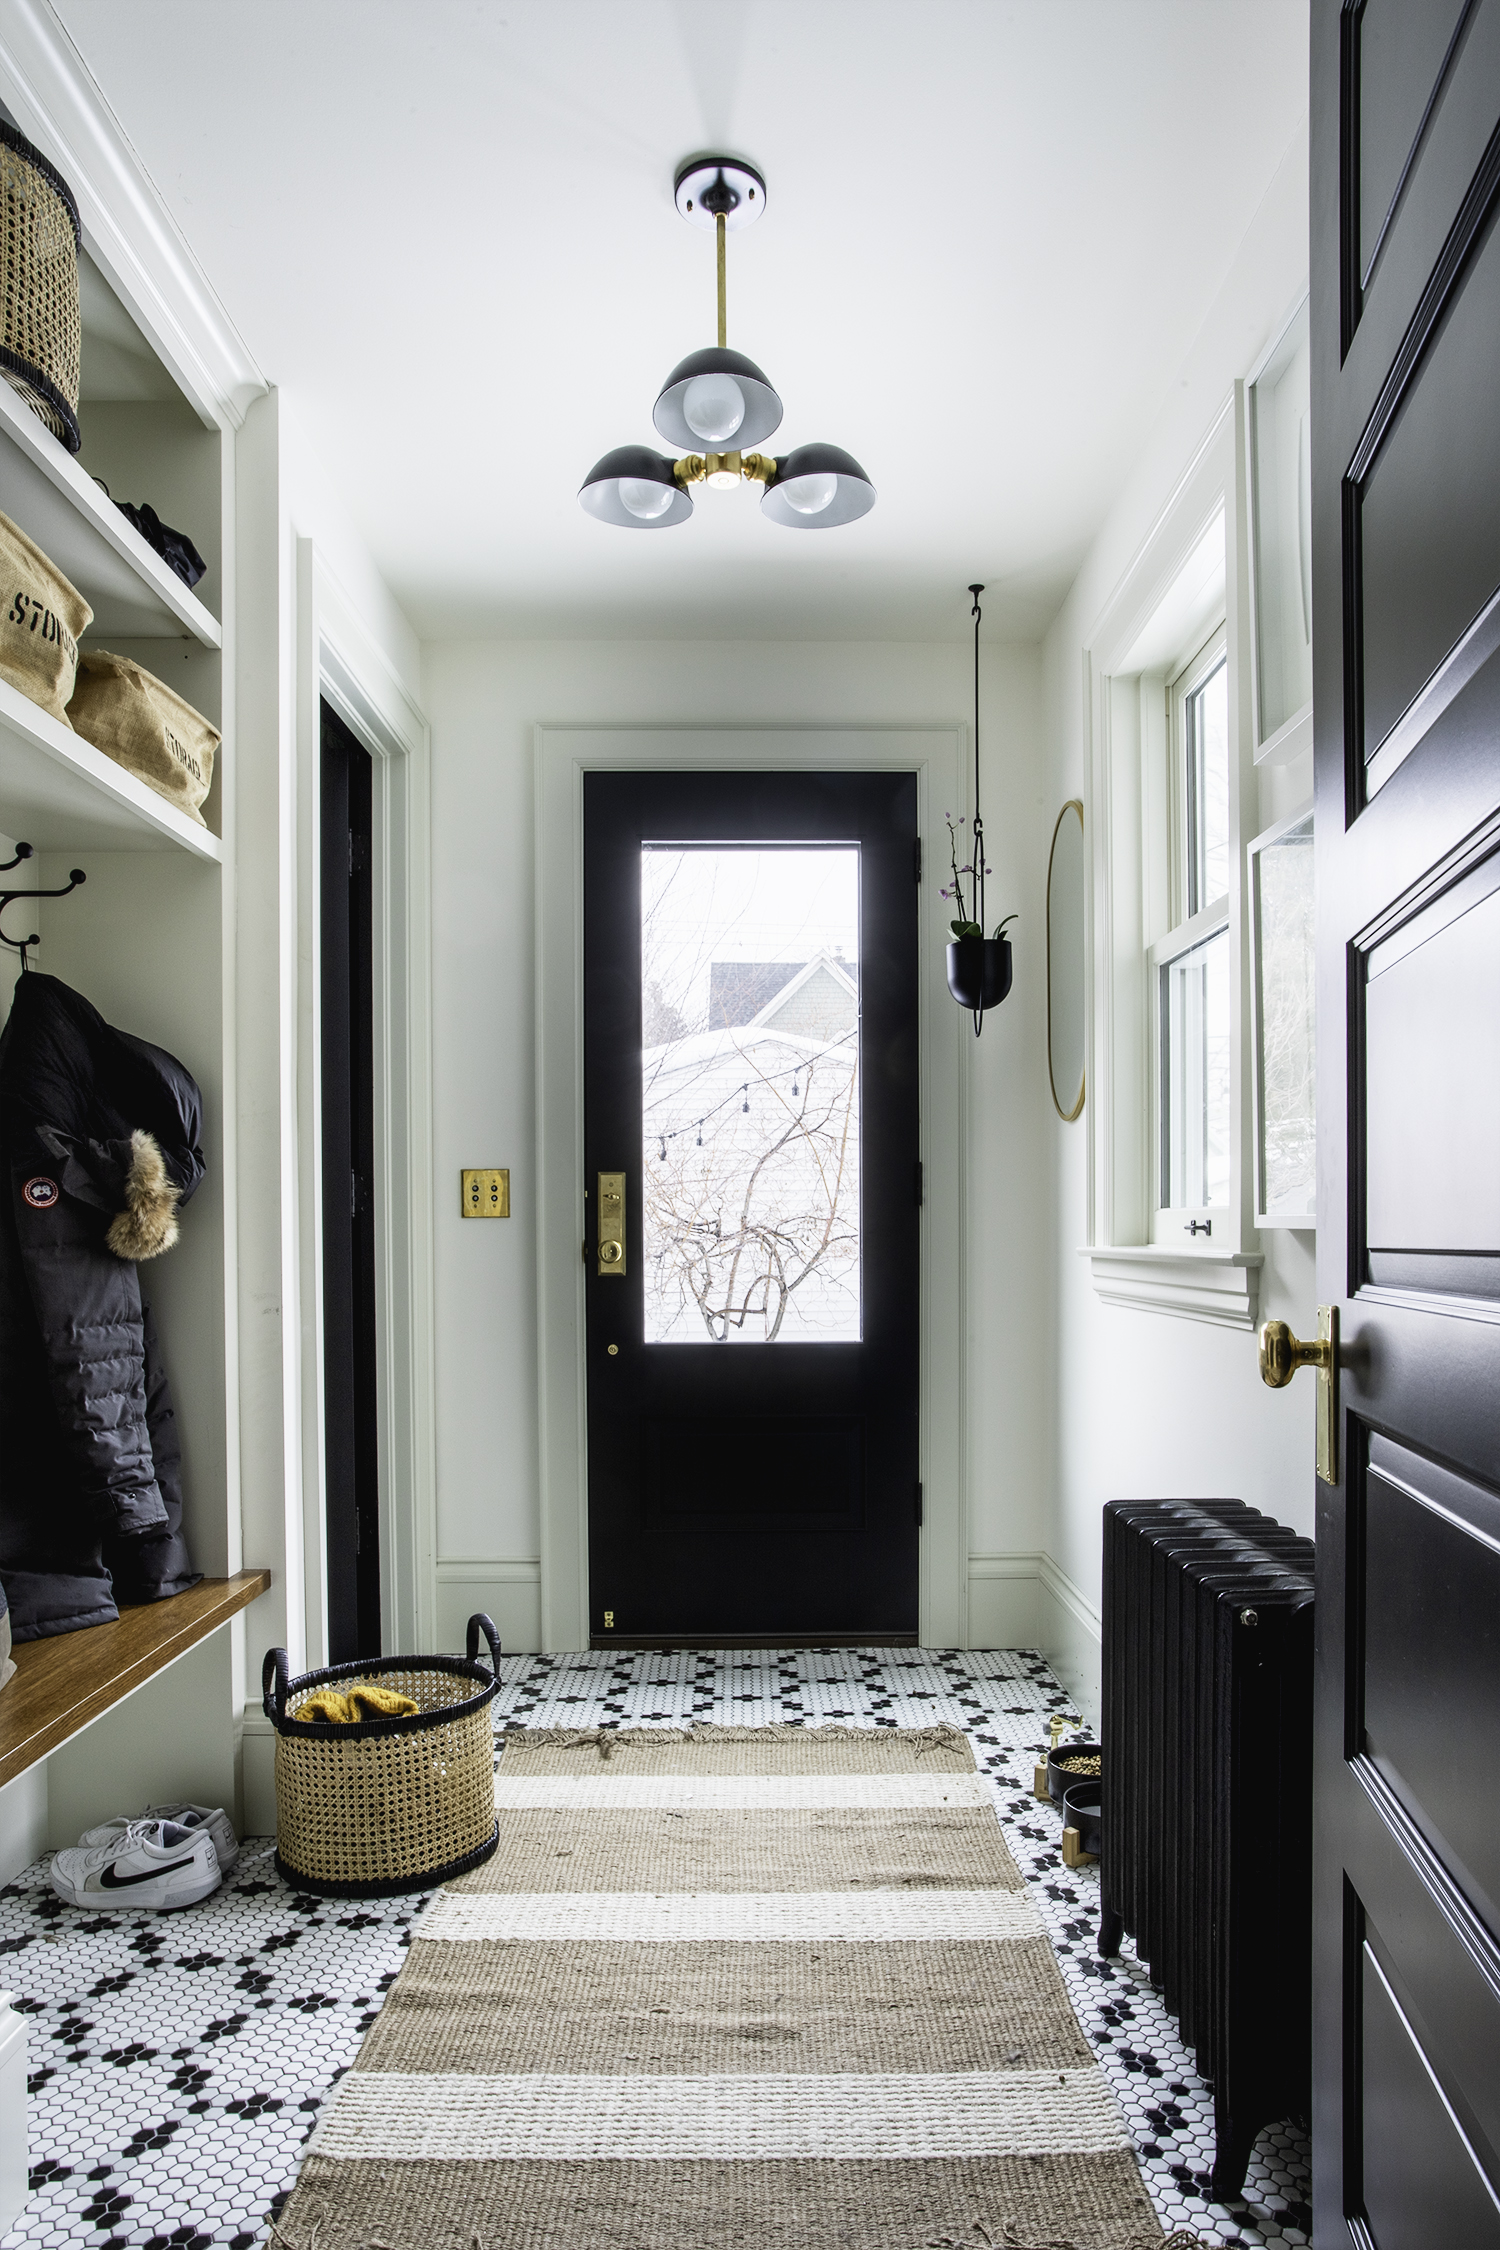 Mudroom with Black and white hex tile flooring and built in cabinetry